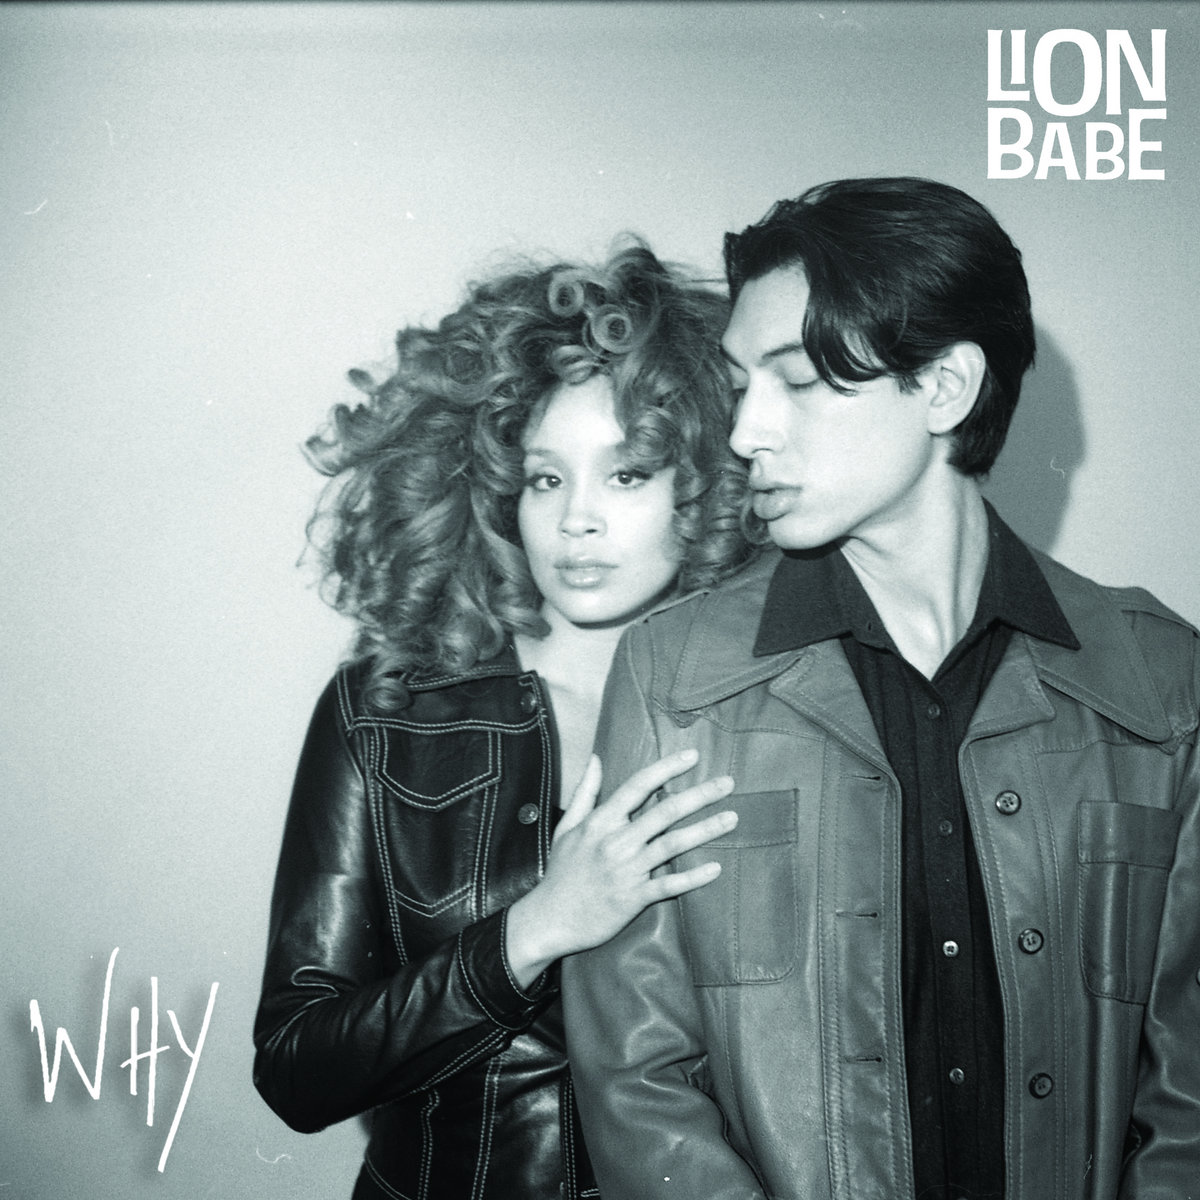 LION BABE — Why cover artwork